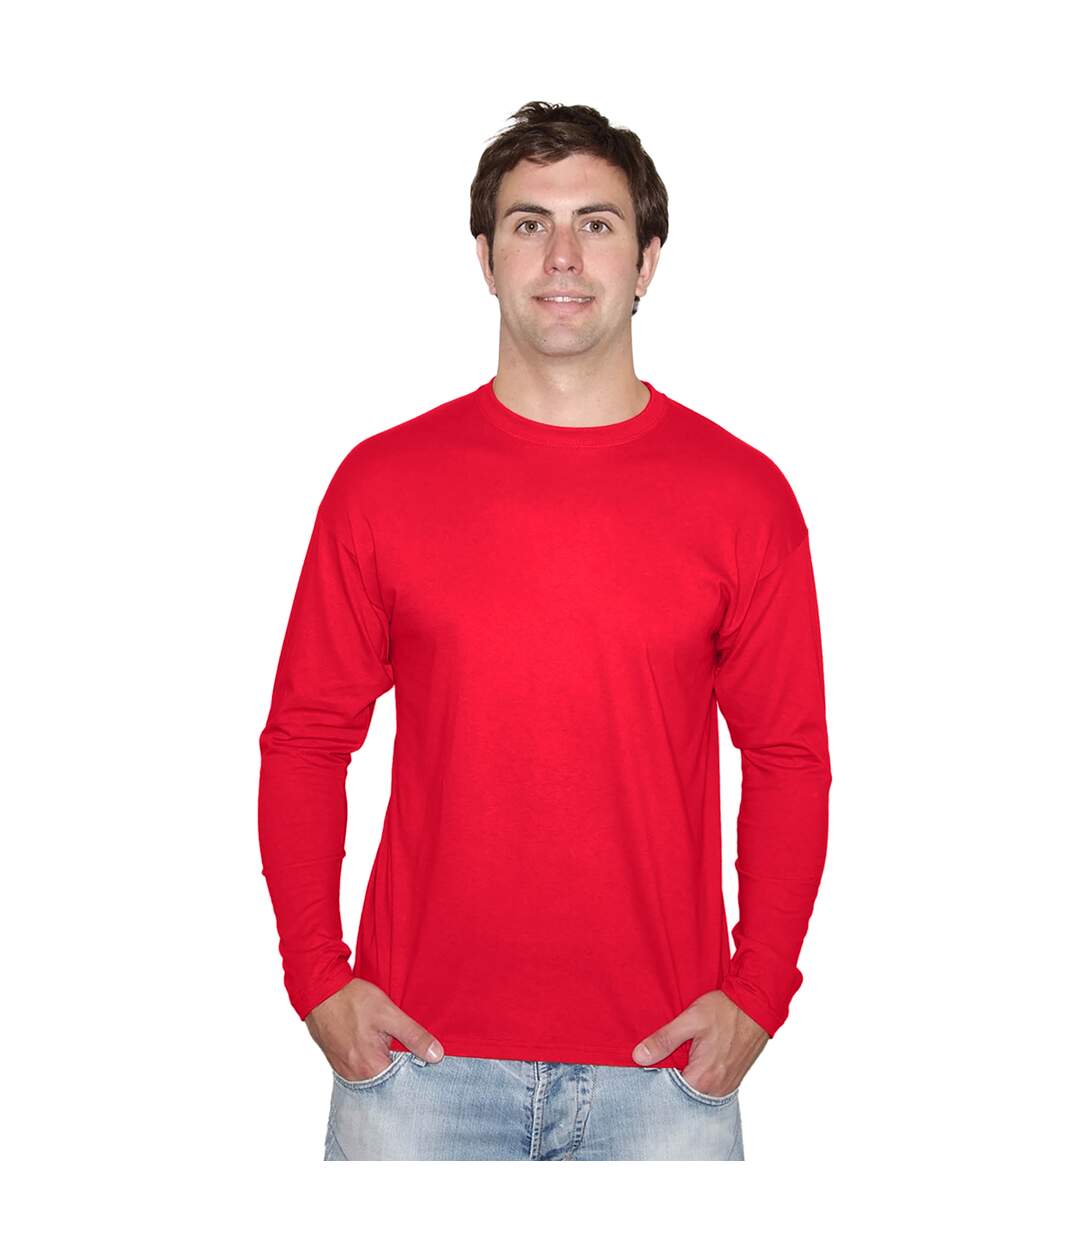 Fruit of the Loom Mens R Long-Sleeved T-Shirt (Red)